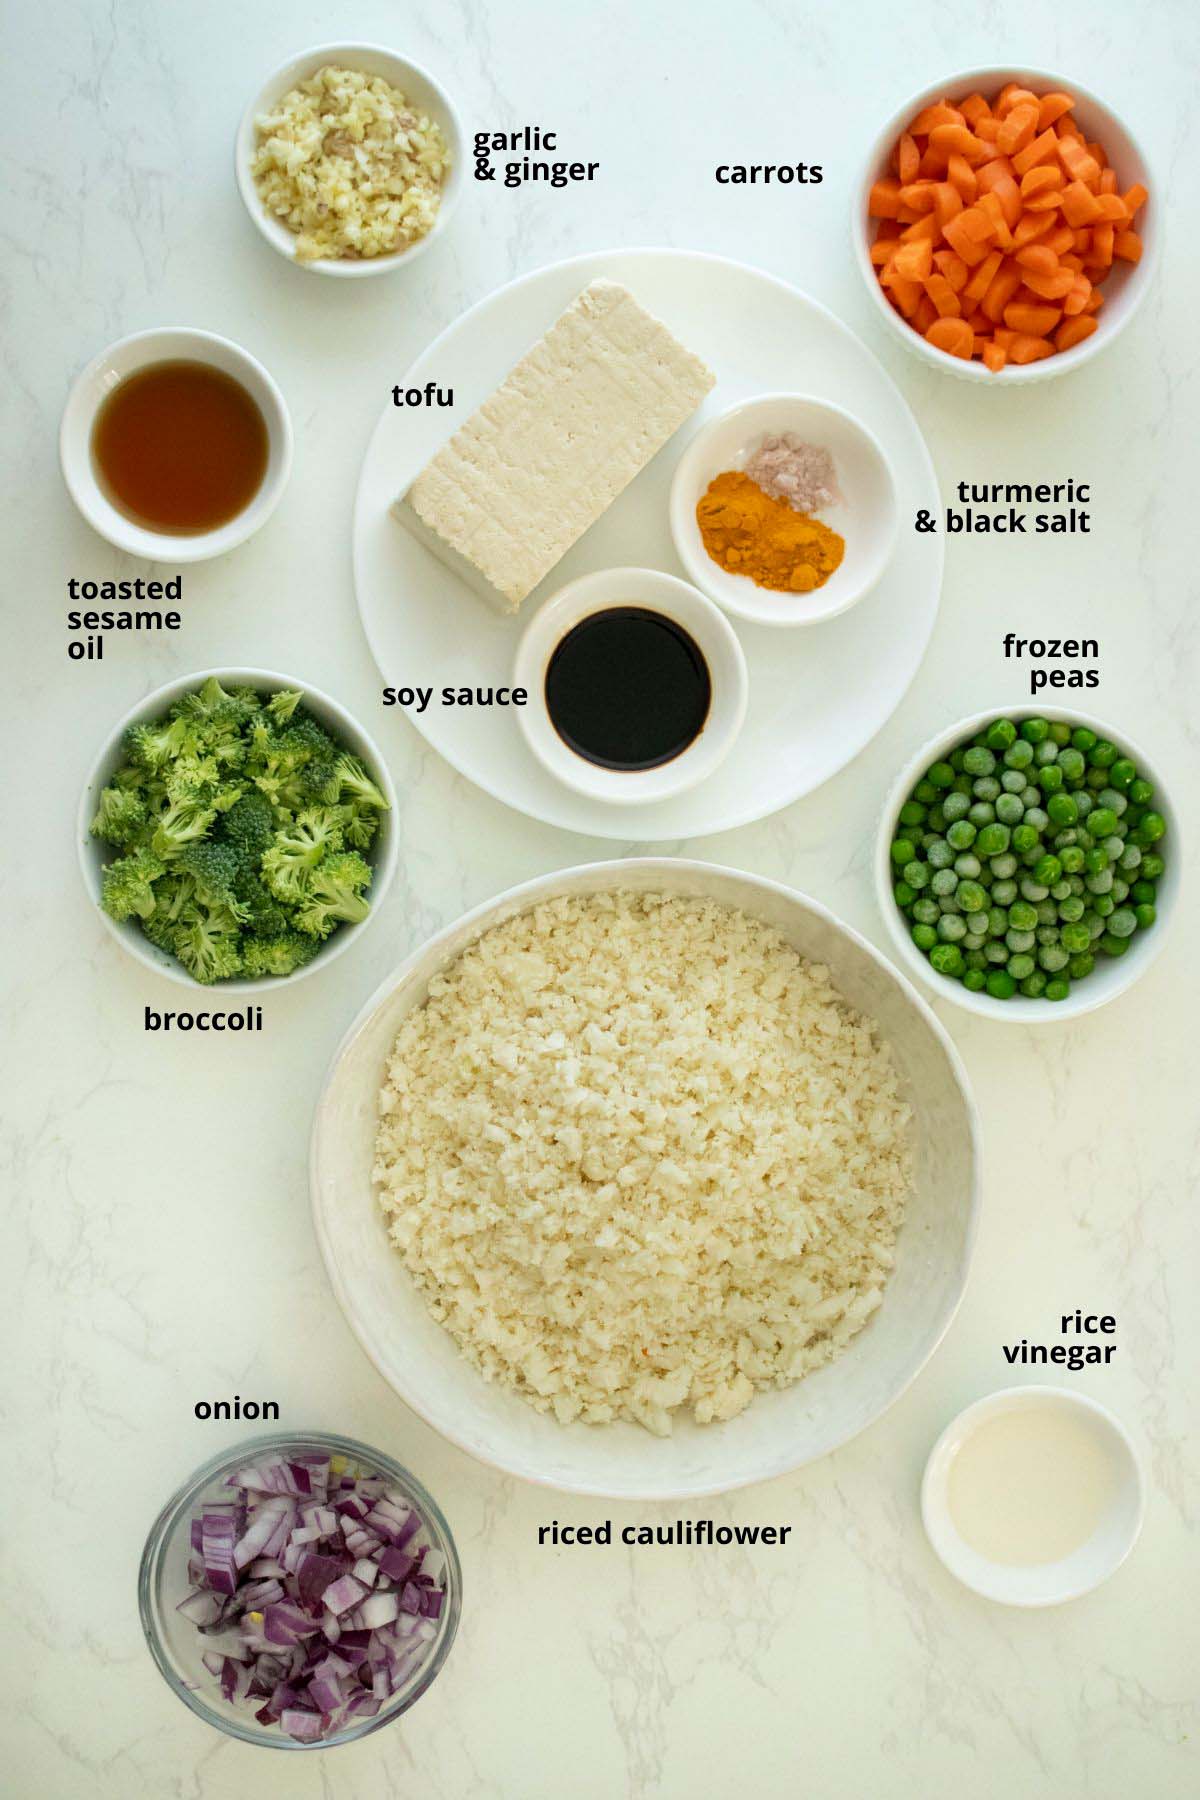 riced cauliflower, other veggies, tofu, and seasoning in bowls on a white table